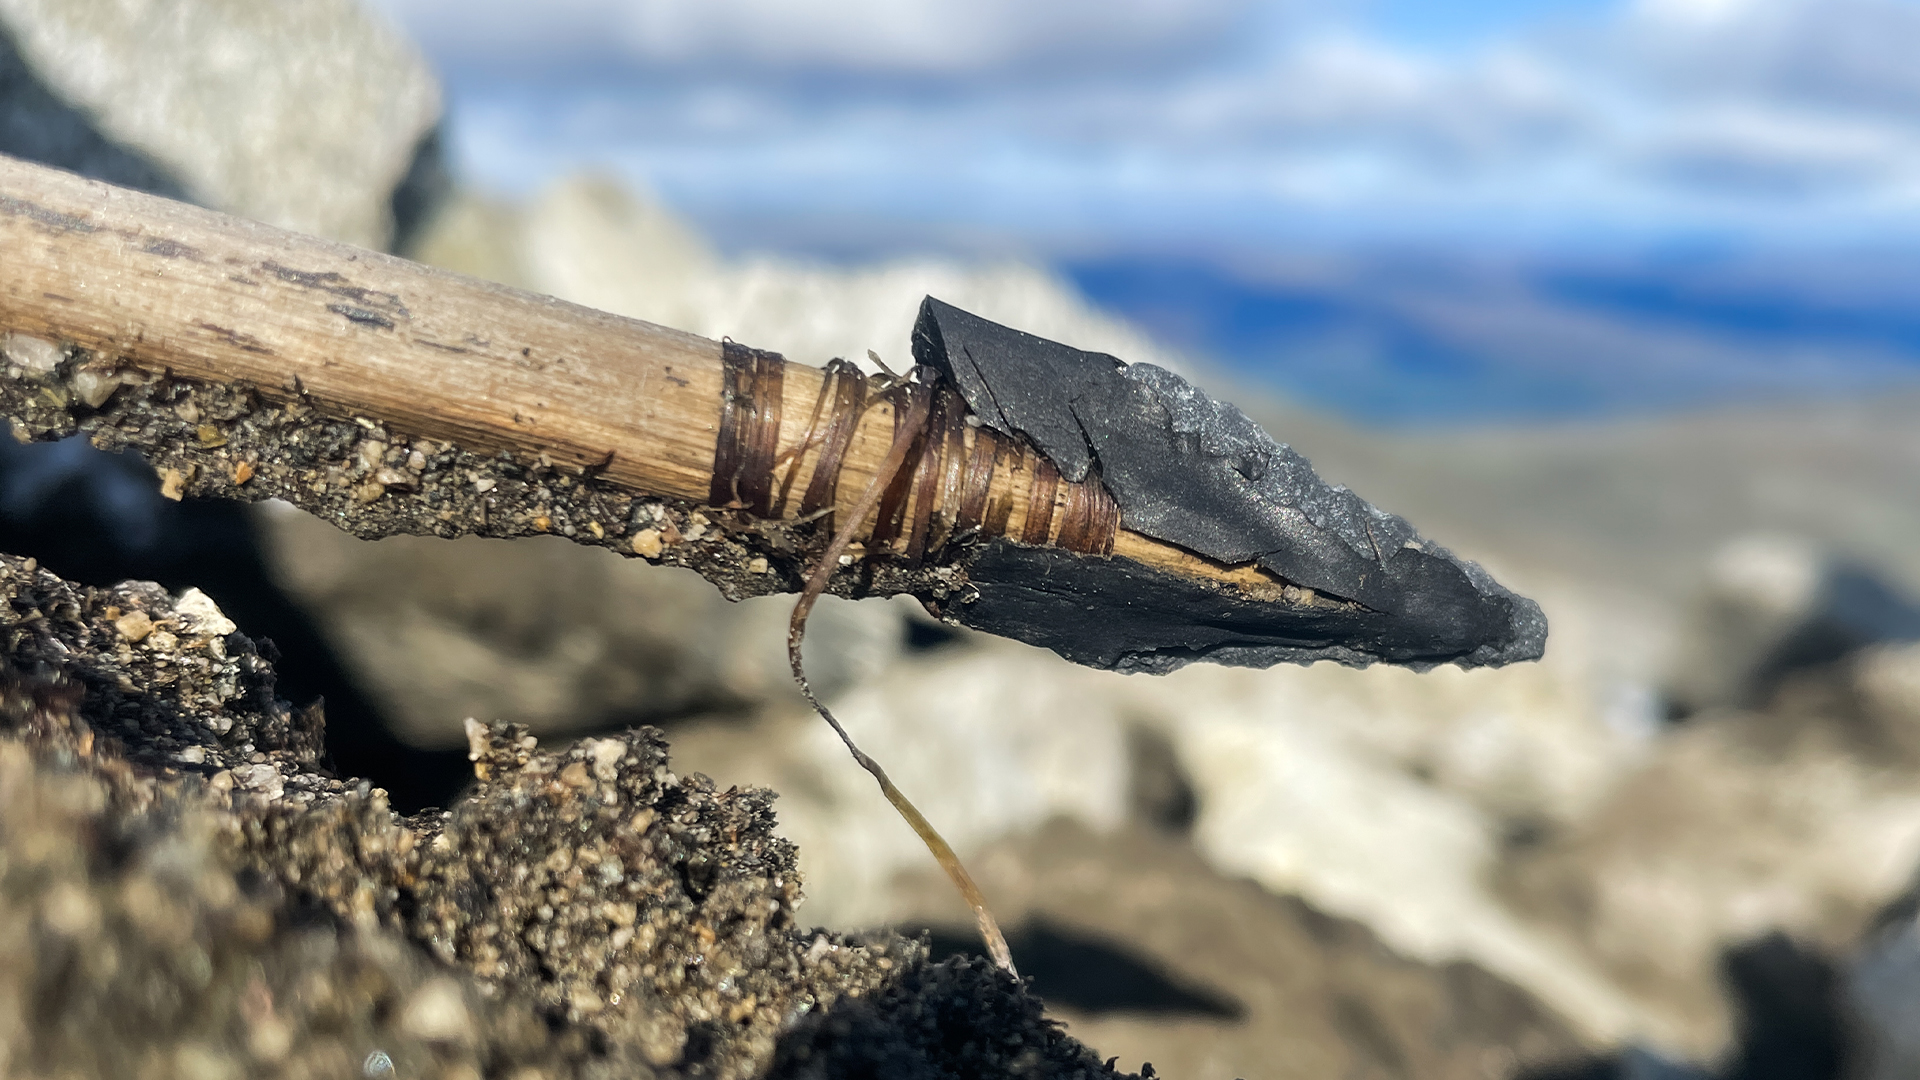 'Very rare' Bronze Age arrow with quartzite tip uncovered from melting ice after 3,000 years